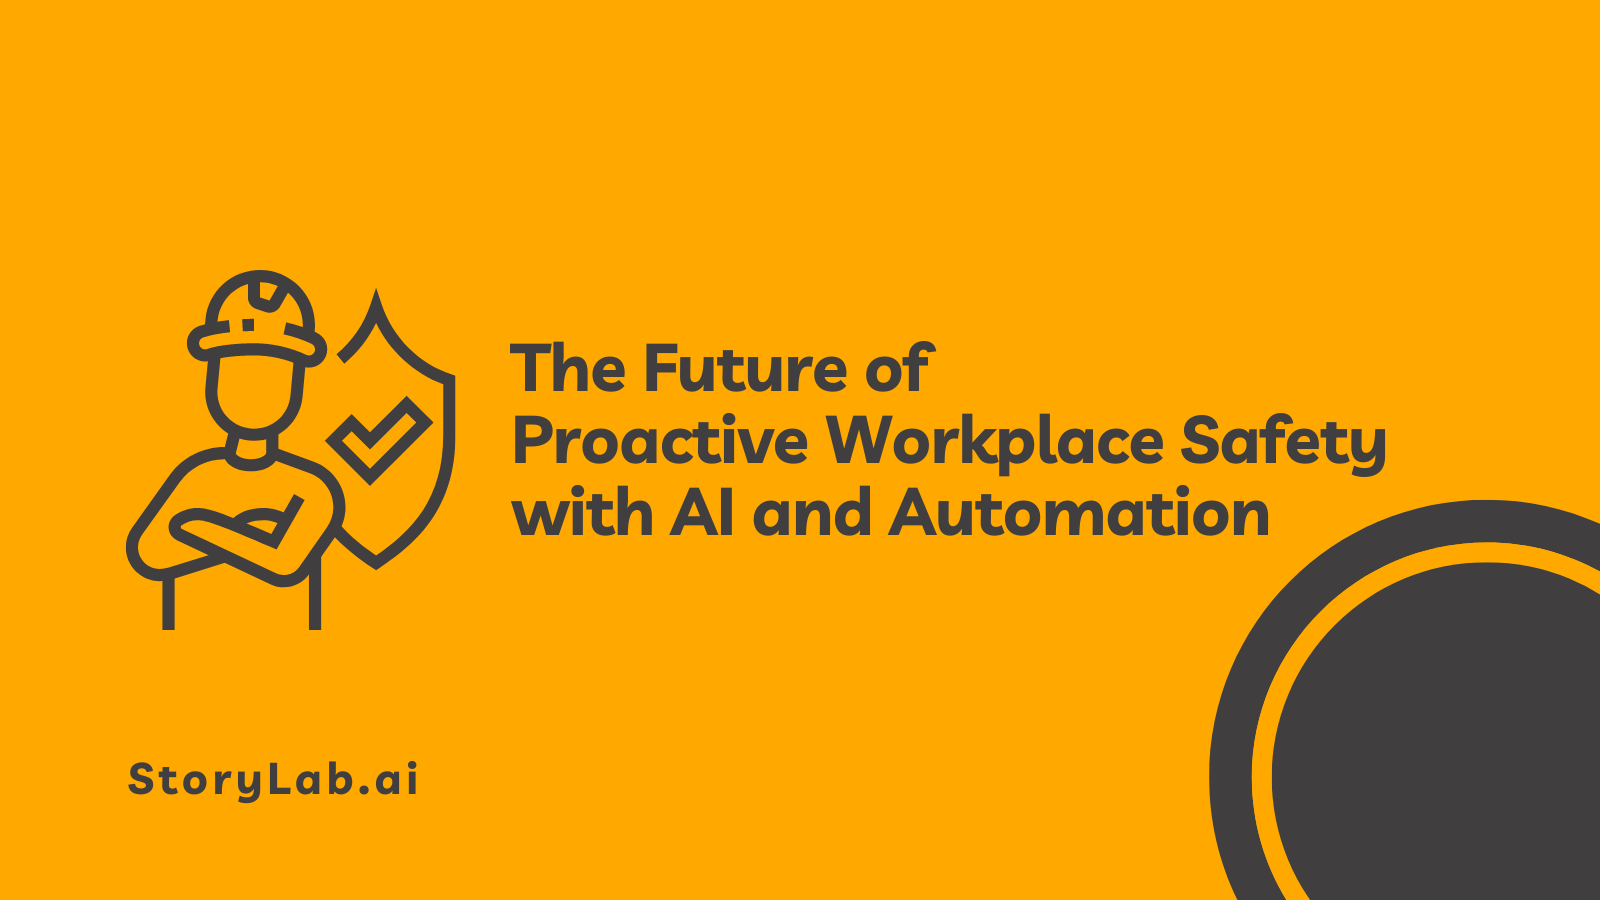 The Future of Proactive Workplace Safety with AI and Automation